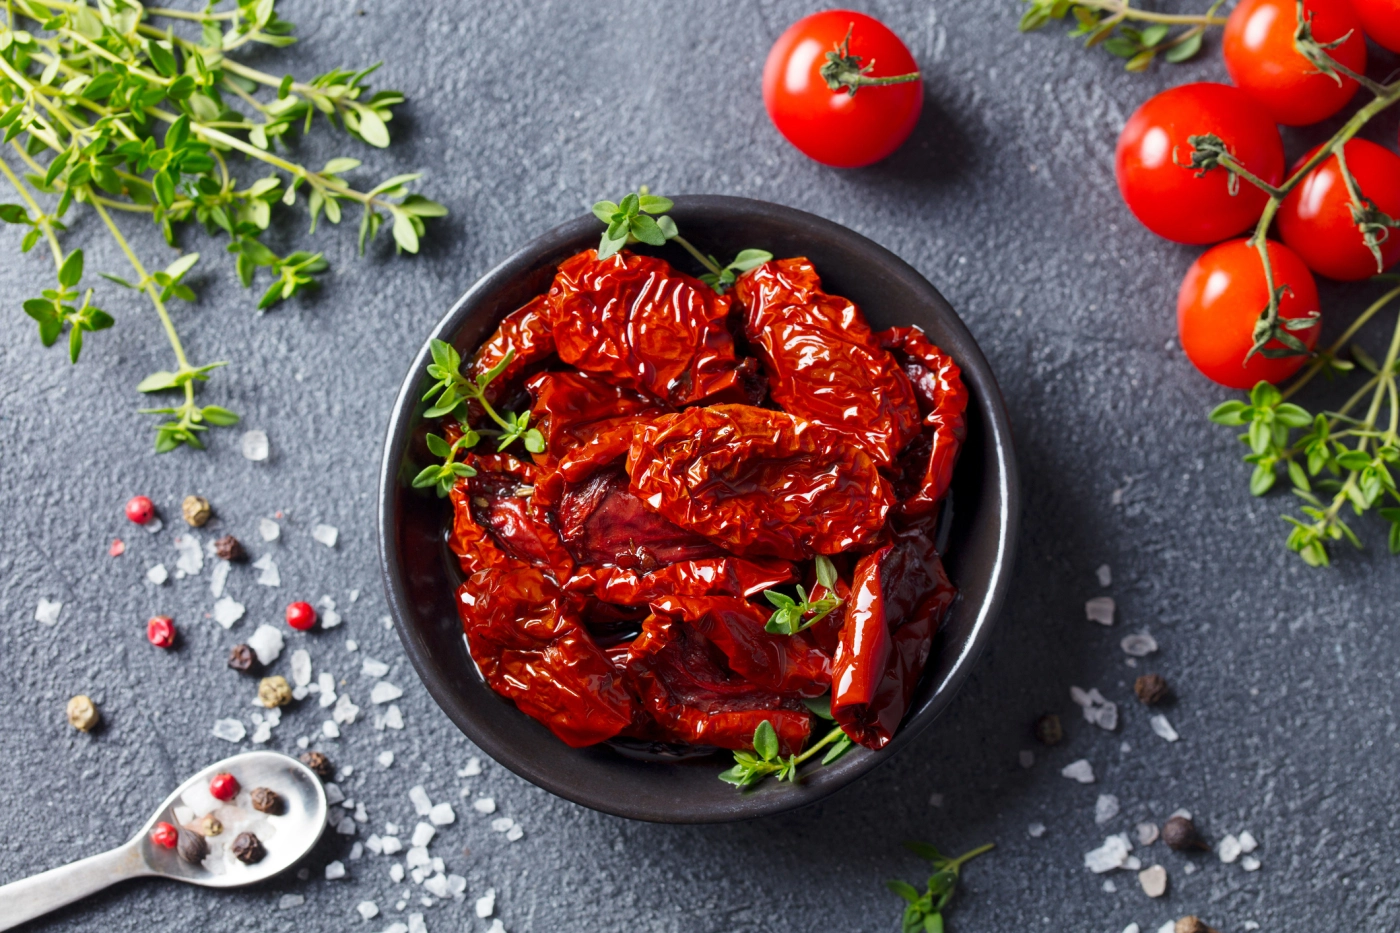 How to Make Sun Dried Tomatoes in the Oven